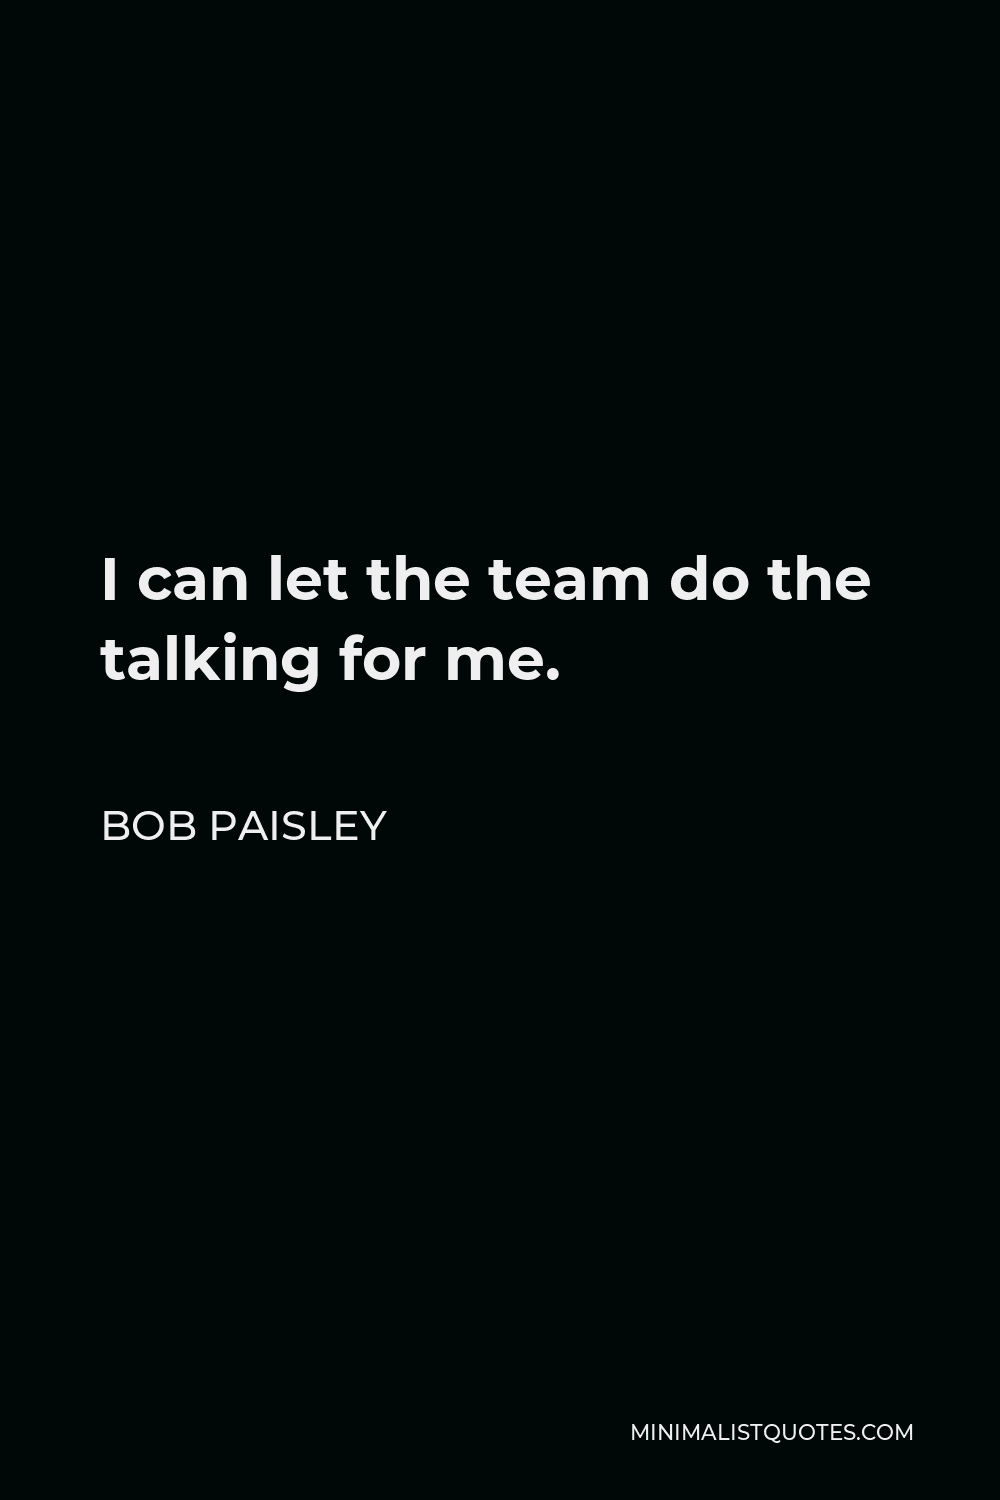 Bob Paisley Quote - I can let the team do the talking for me.